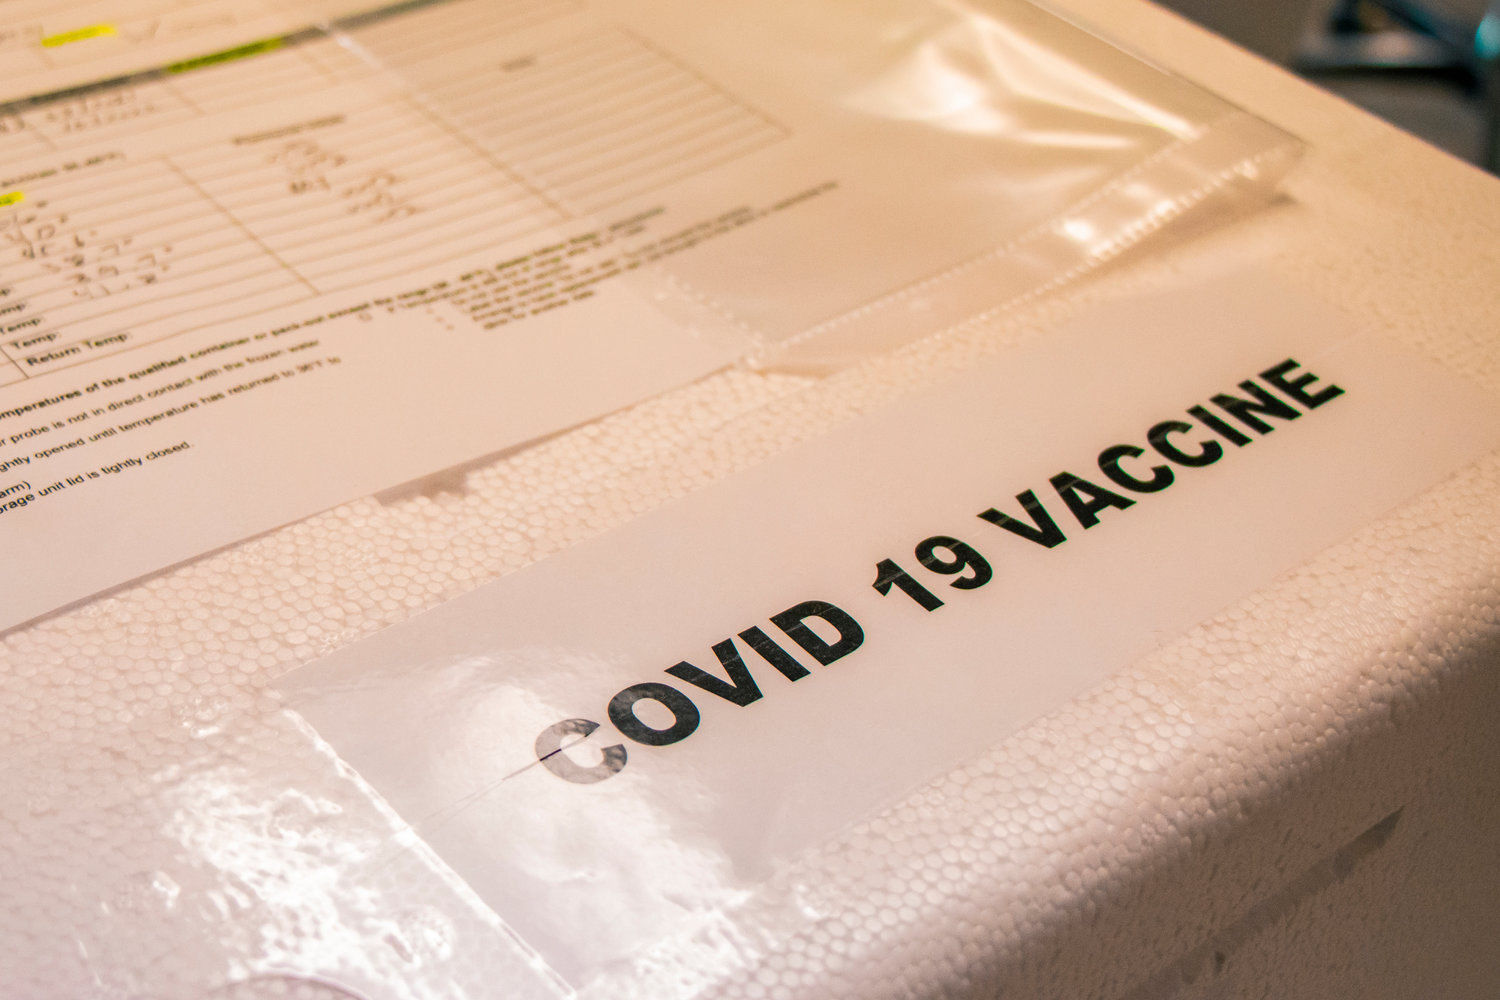 A cooler containing the Pfizer COVID-19 vaccine sits on a table at Prestige Post-Acute and Rehab Center Jan. 14 in Centralia.